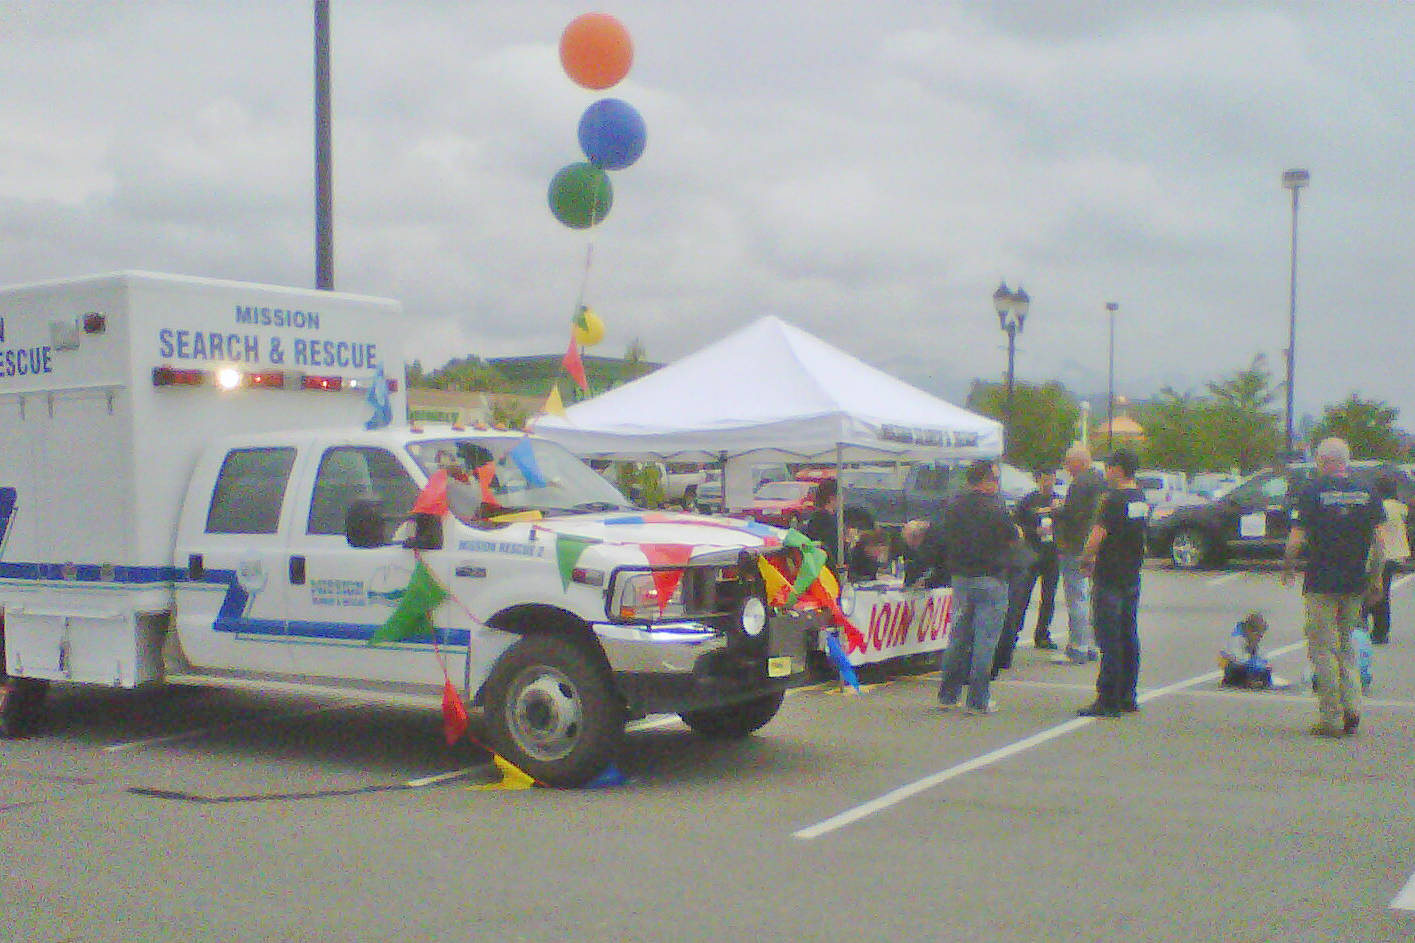 9955890_web1_Magnuson-Mission-Search-and-Rescue---Drive-One-4UR-Community-Event-006